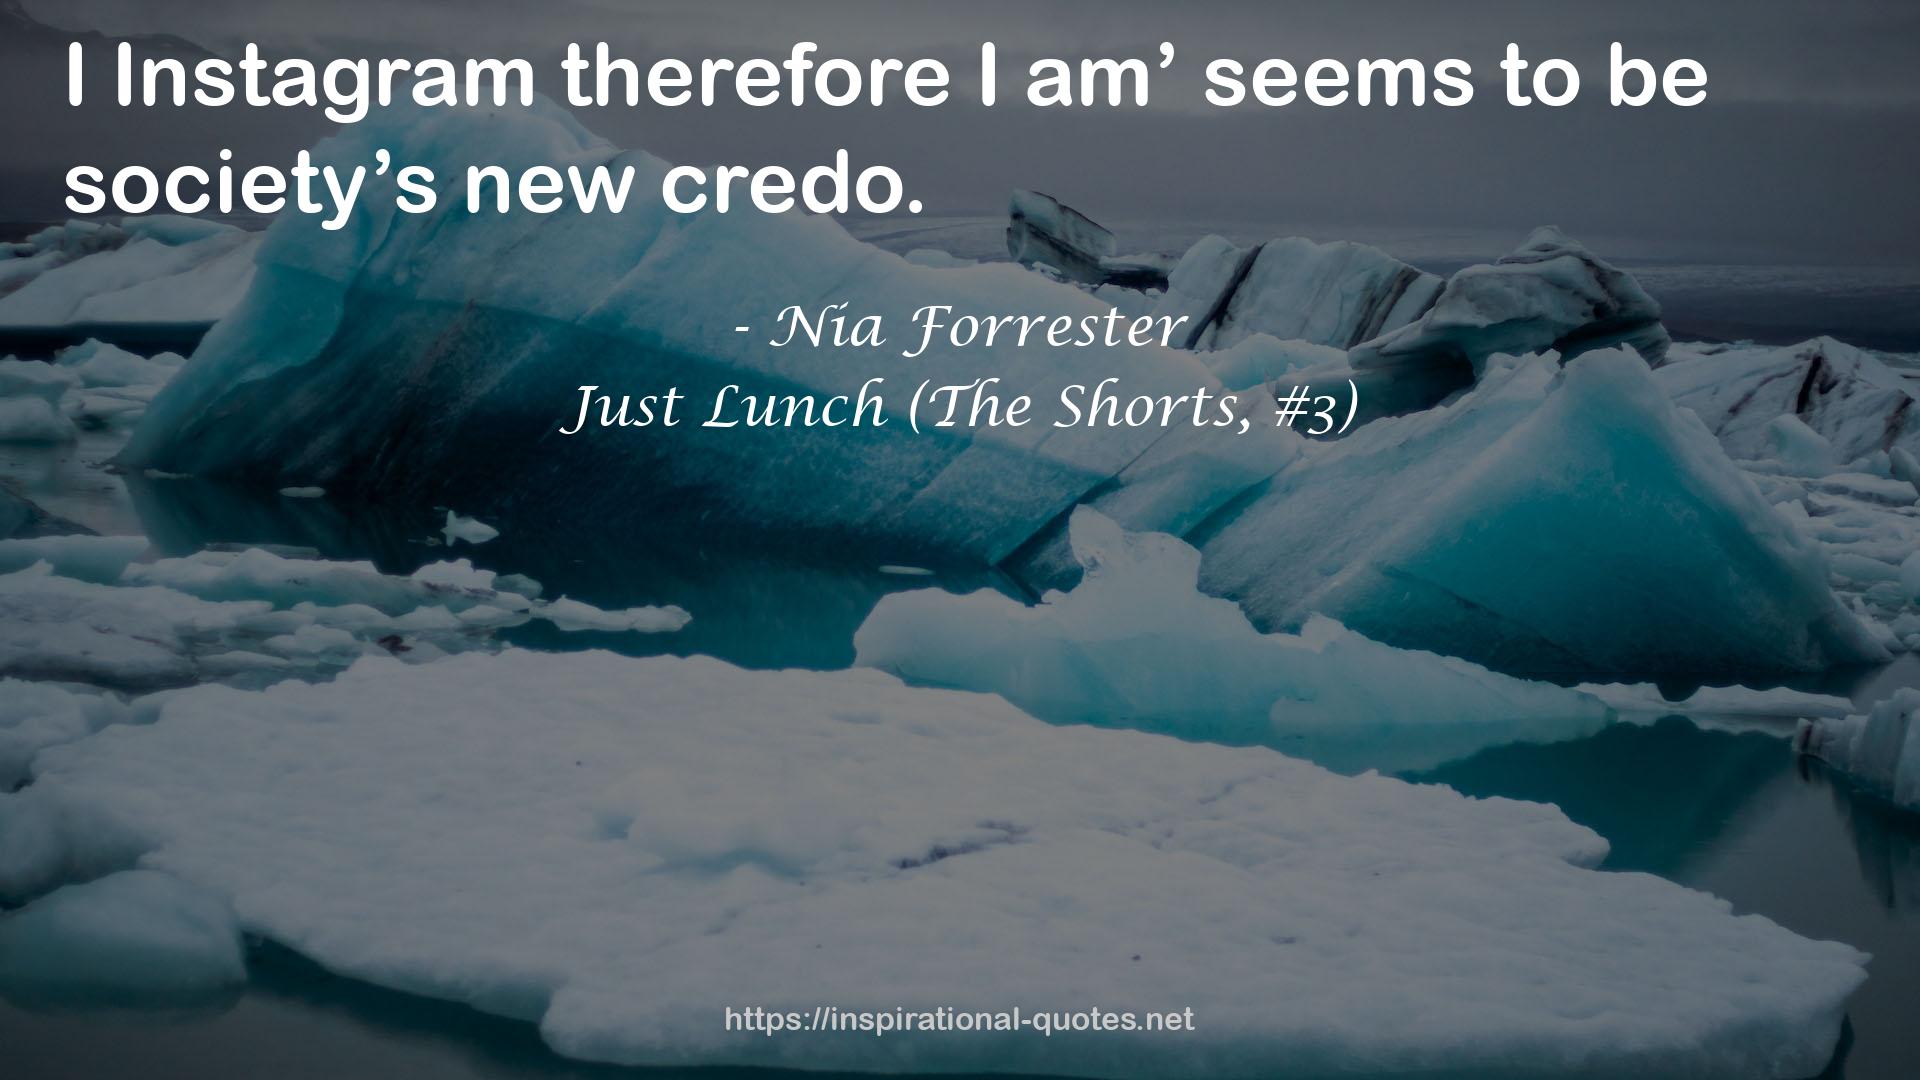 Just Lunch (The Shorts, #3) QUOTES